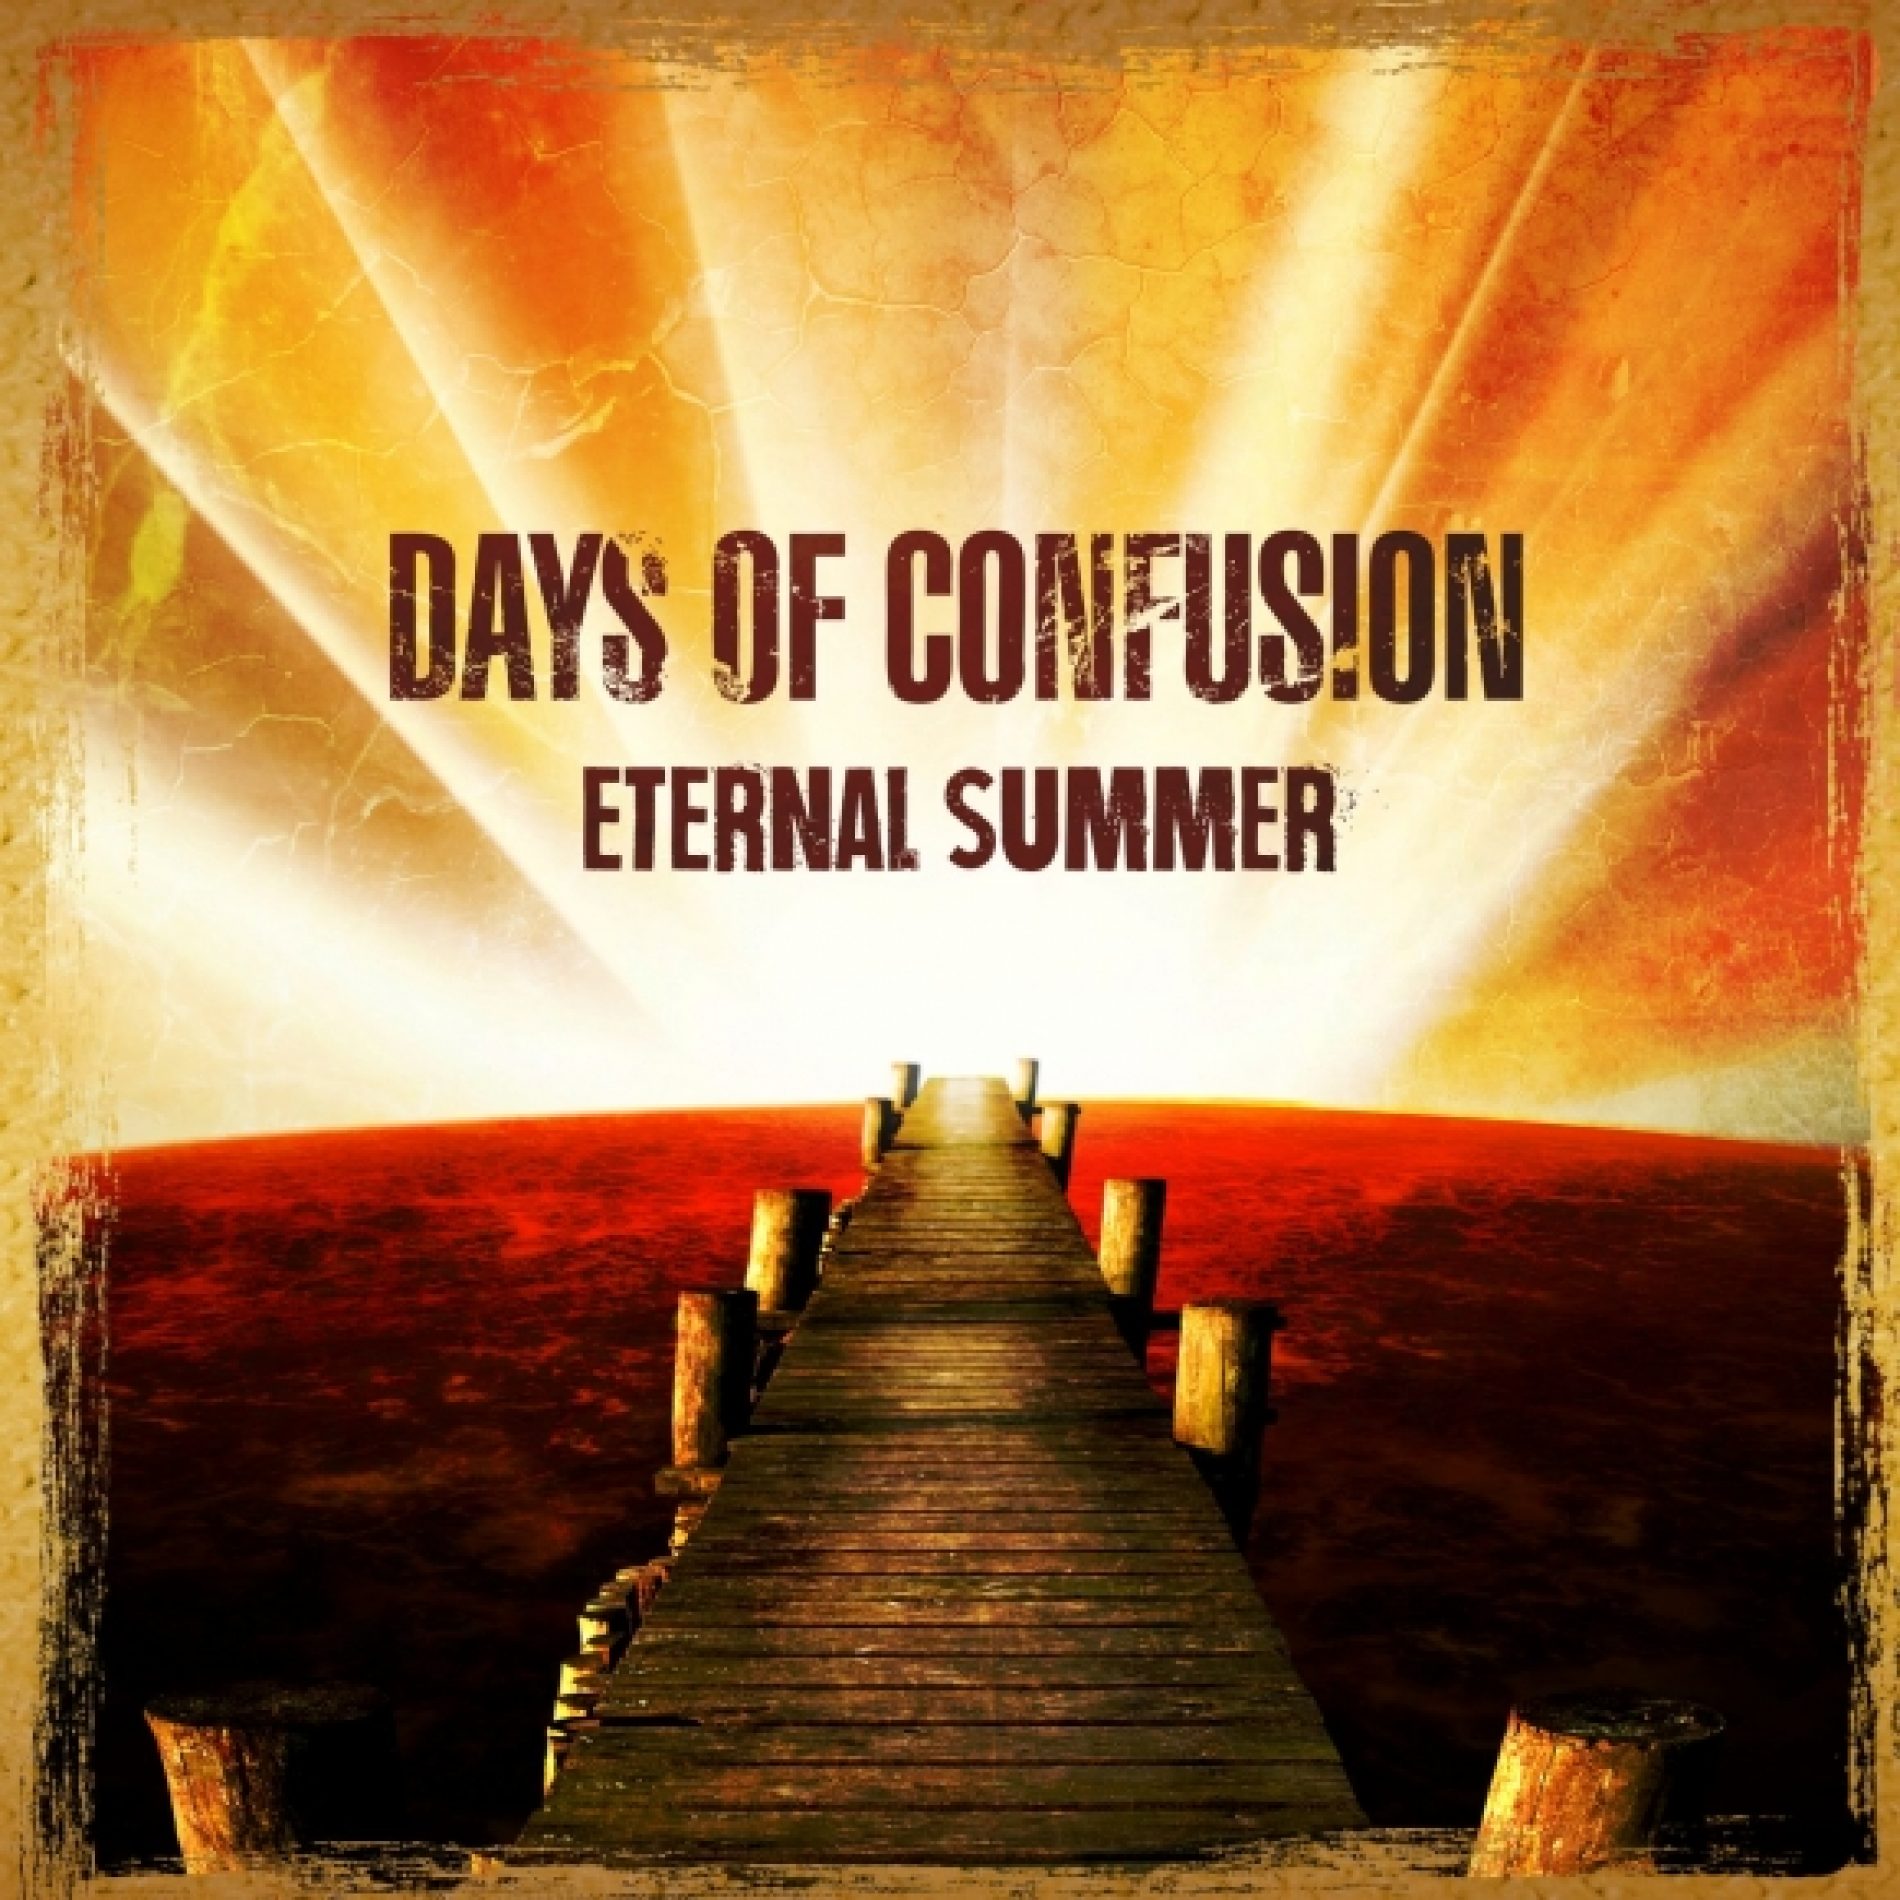 Days of Confusion – Eternal Summer (videoclip oficial)